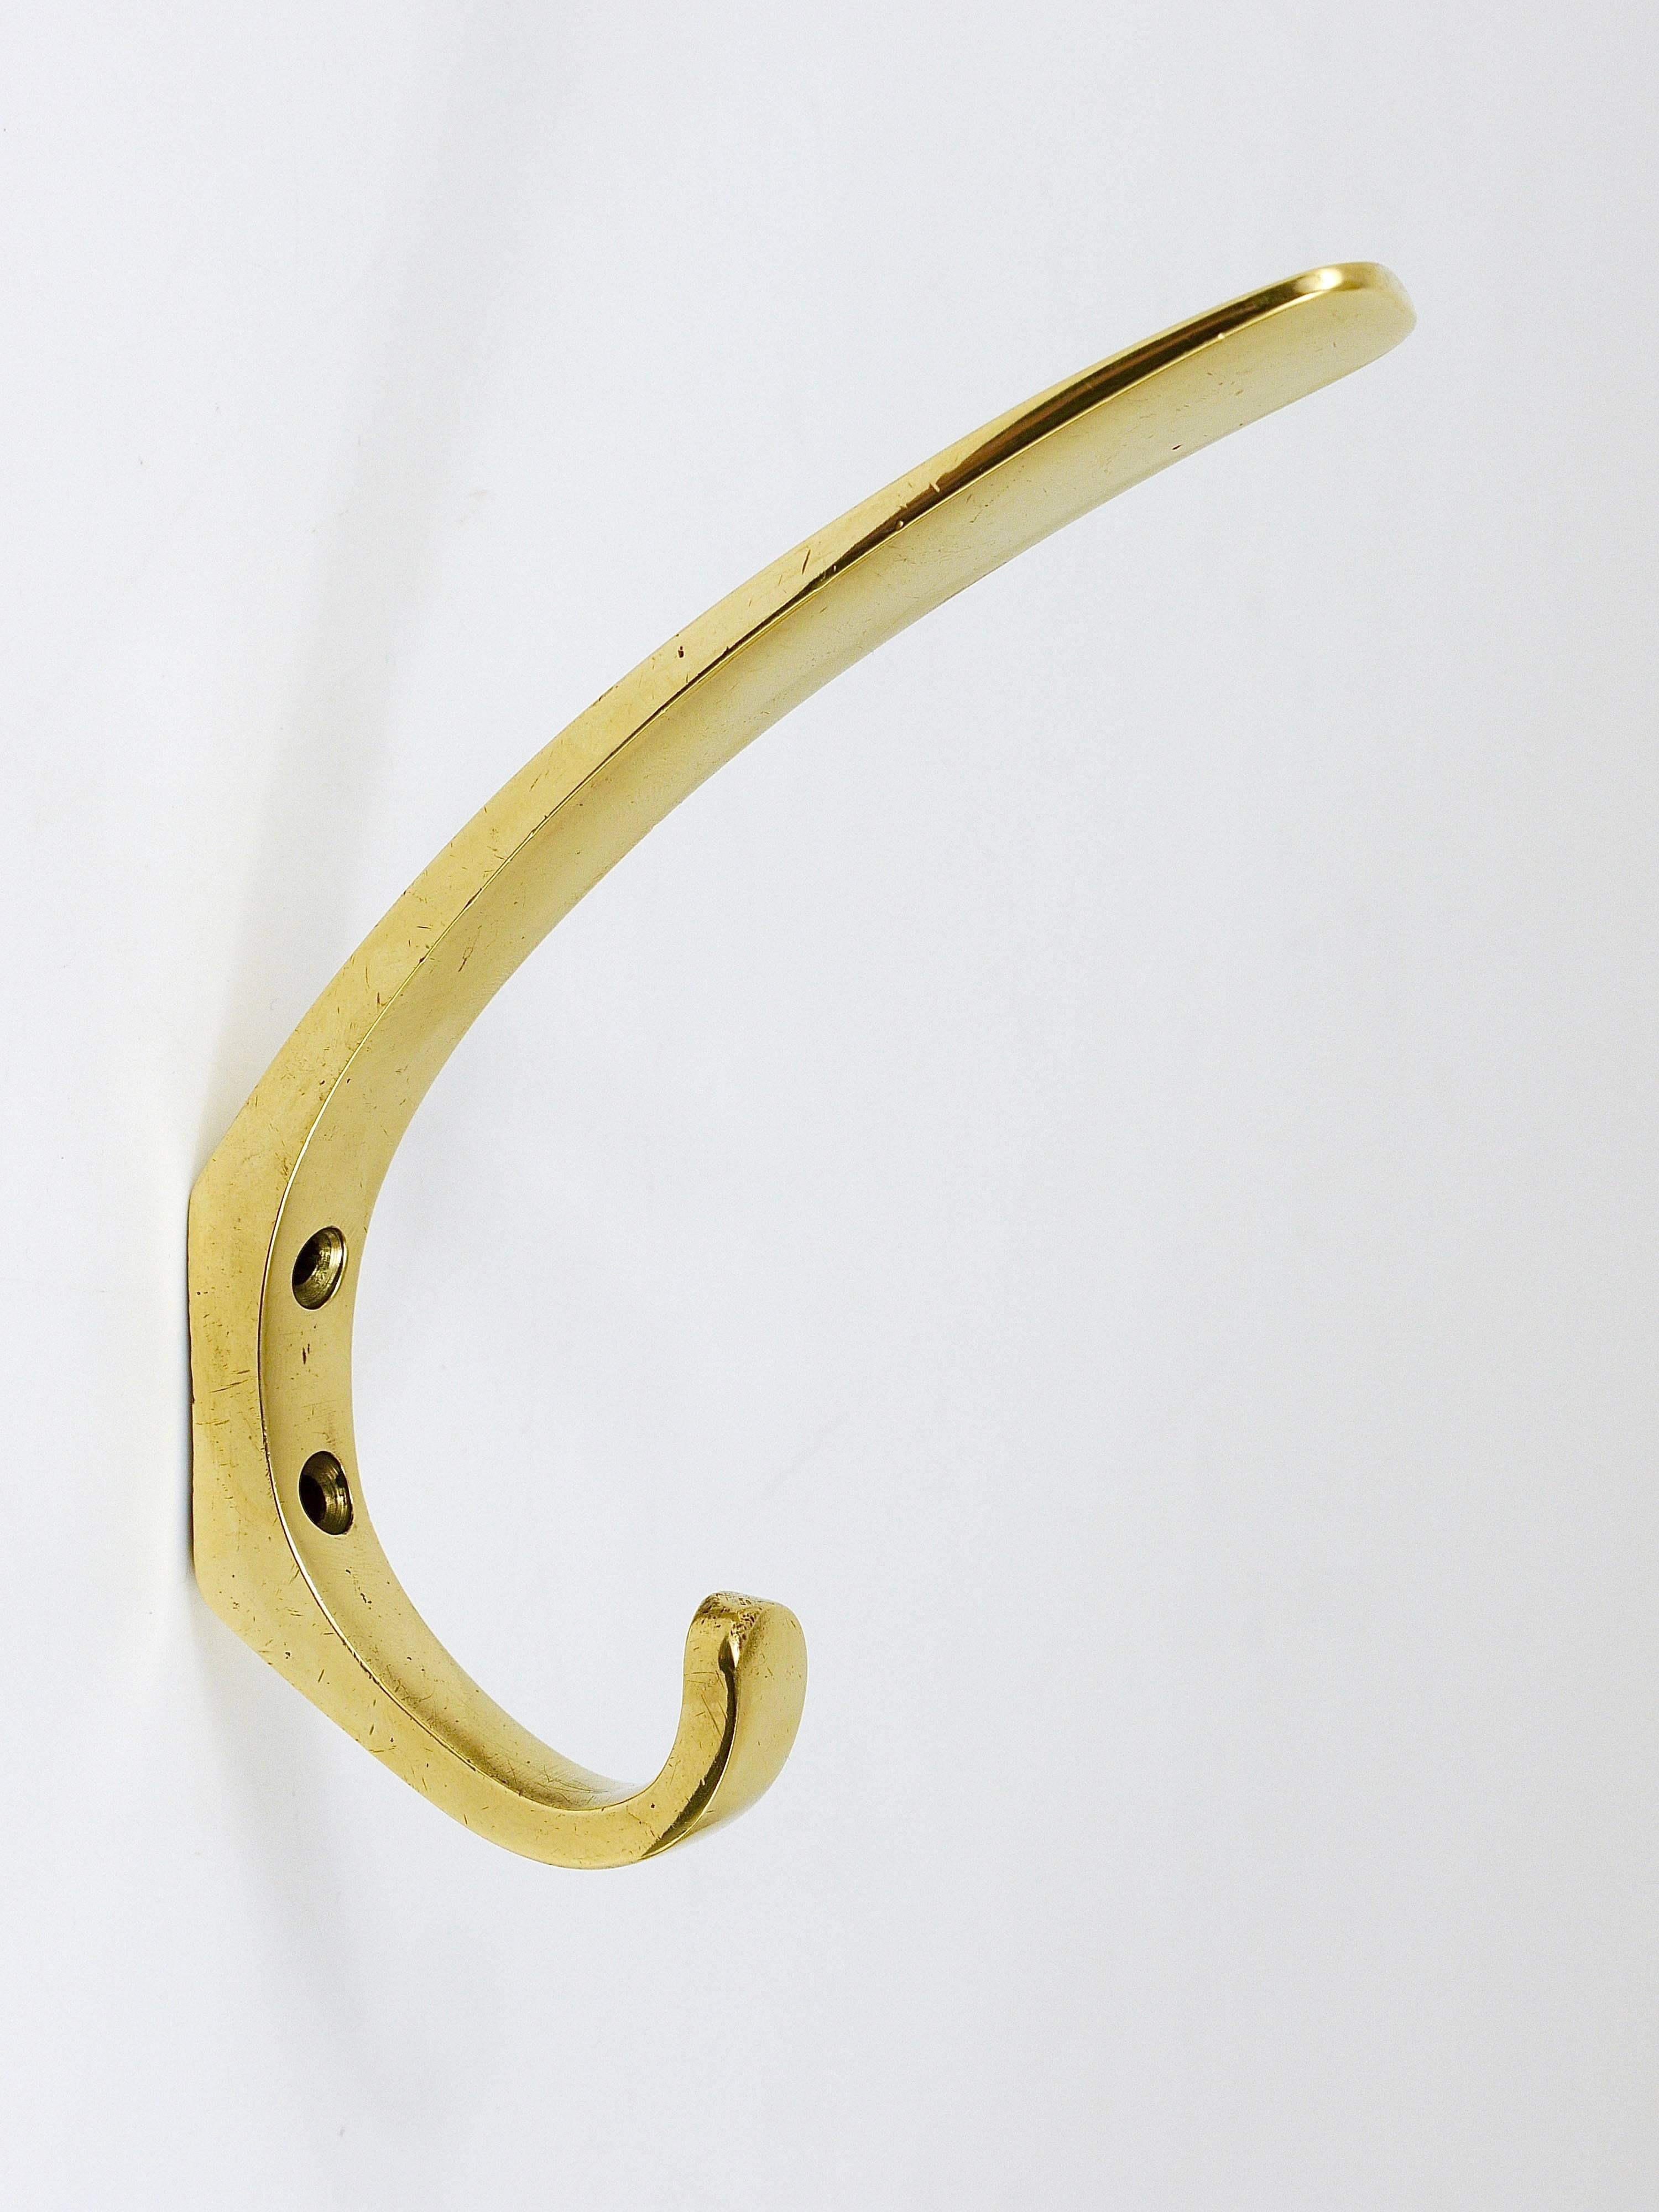 Polished 9x Midcentury Brass Wall Coat Hooks by Herta Baller Vienna, Austria,  1950s For Sale